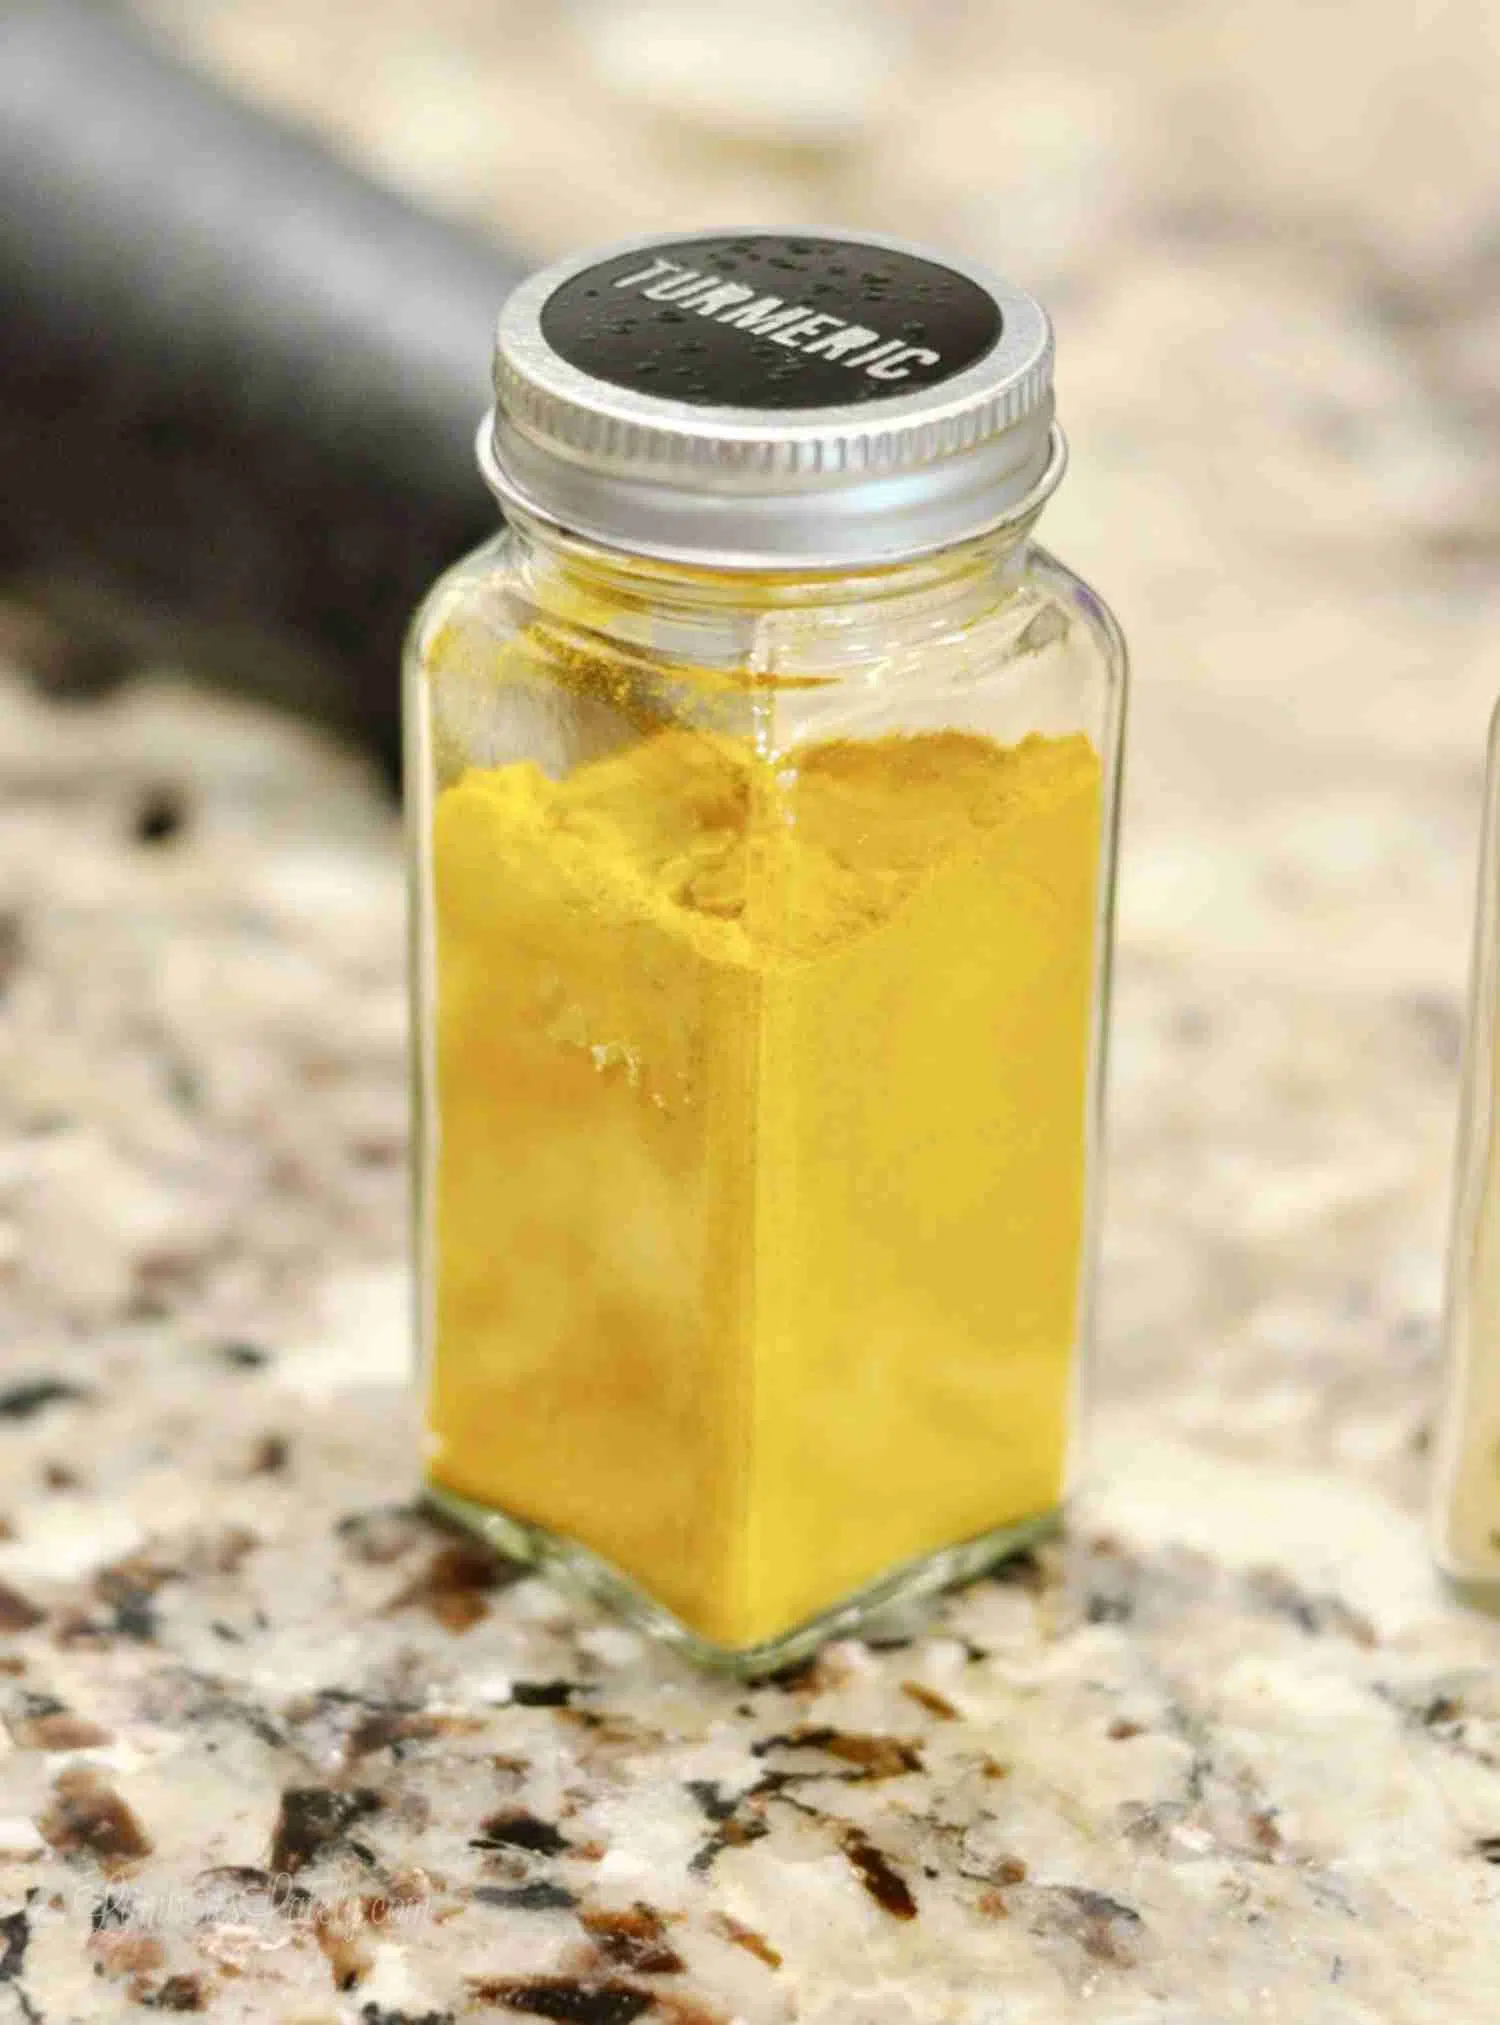 yellow turmeric in a glass spice jar with a black label on top.